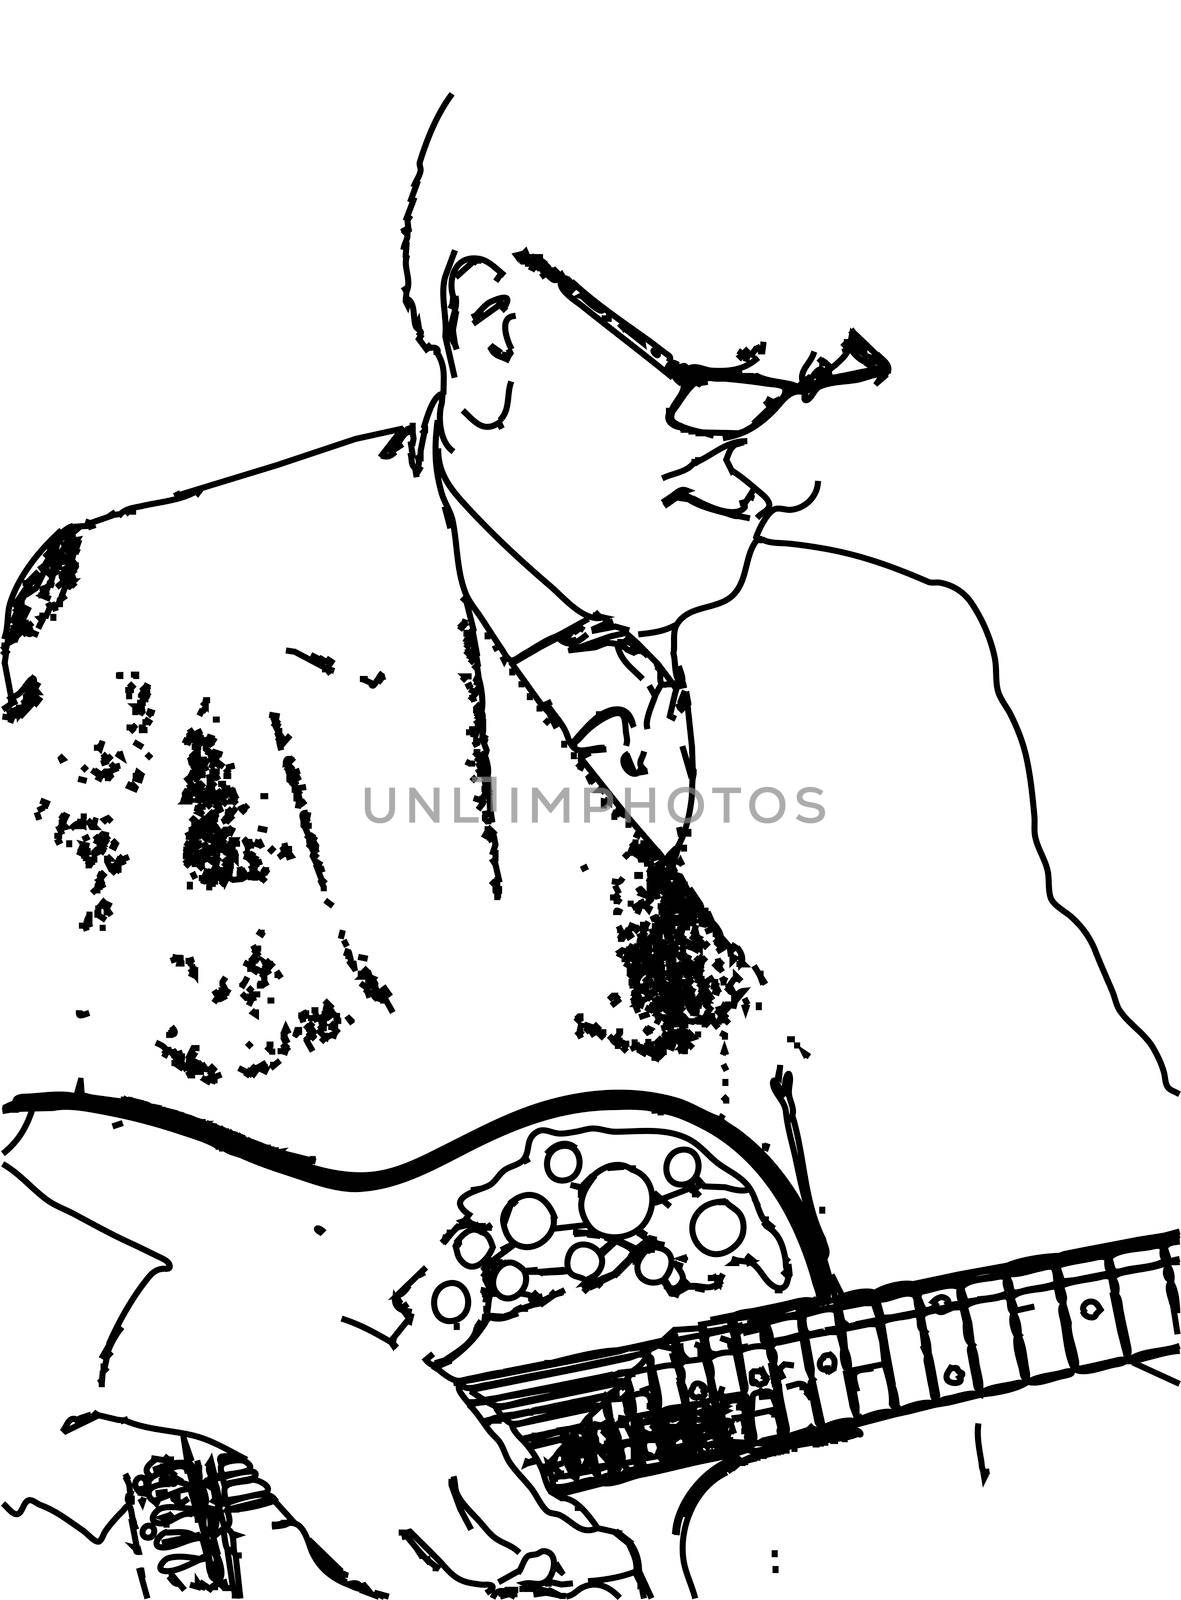 Outline sketch of an old jazz style guitarist